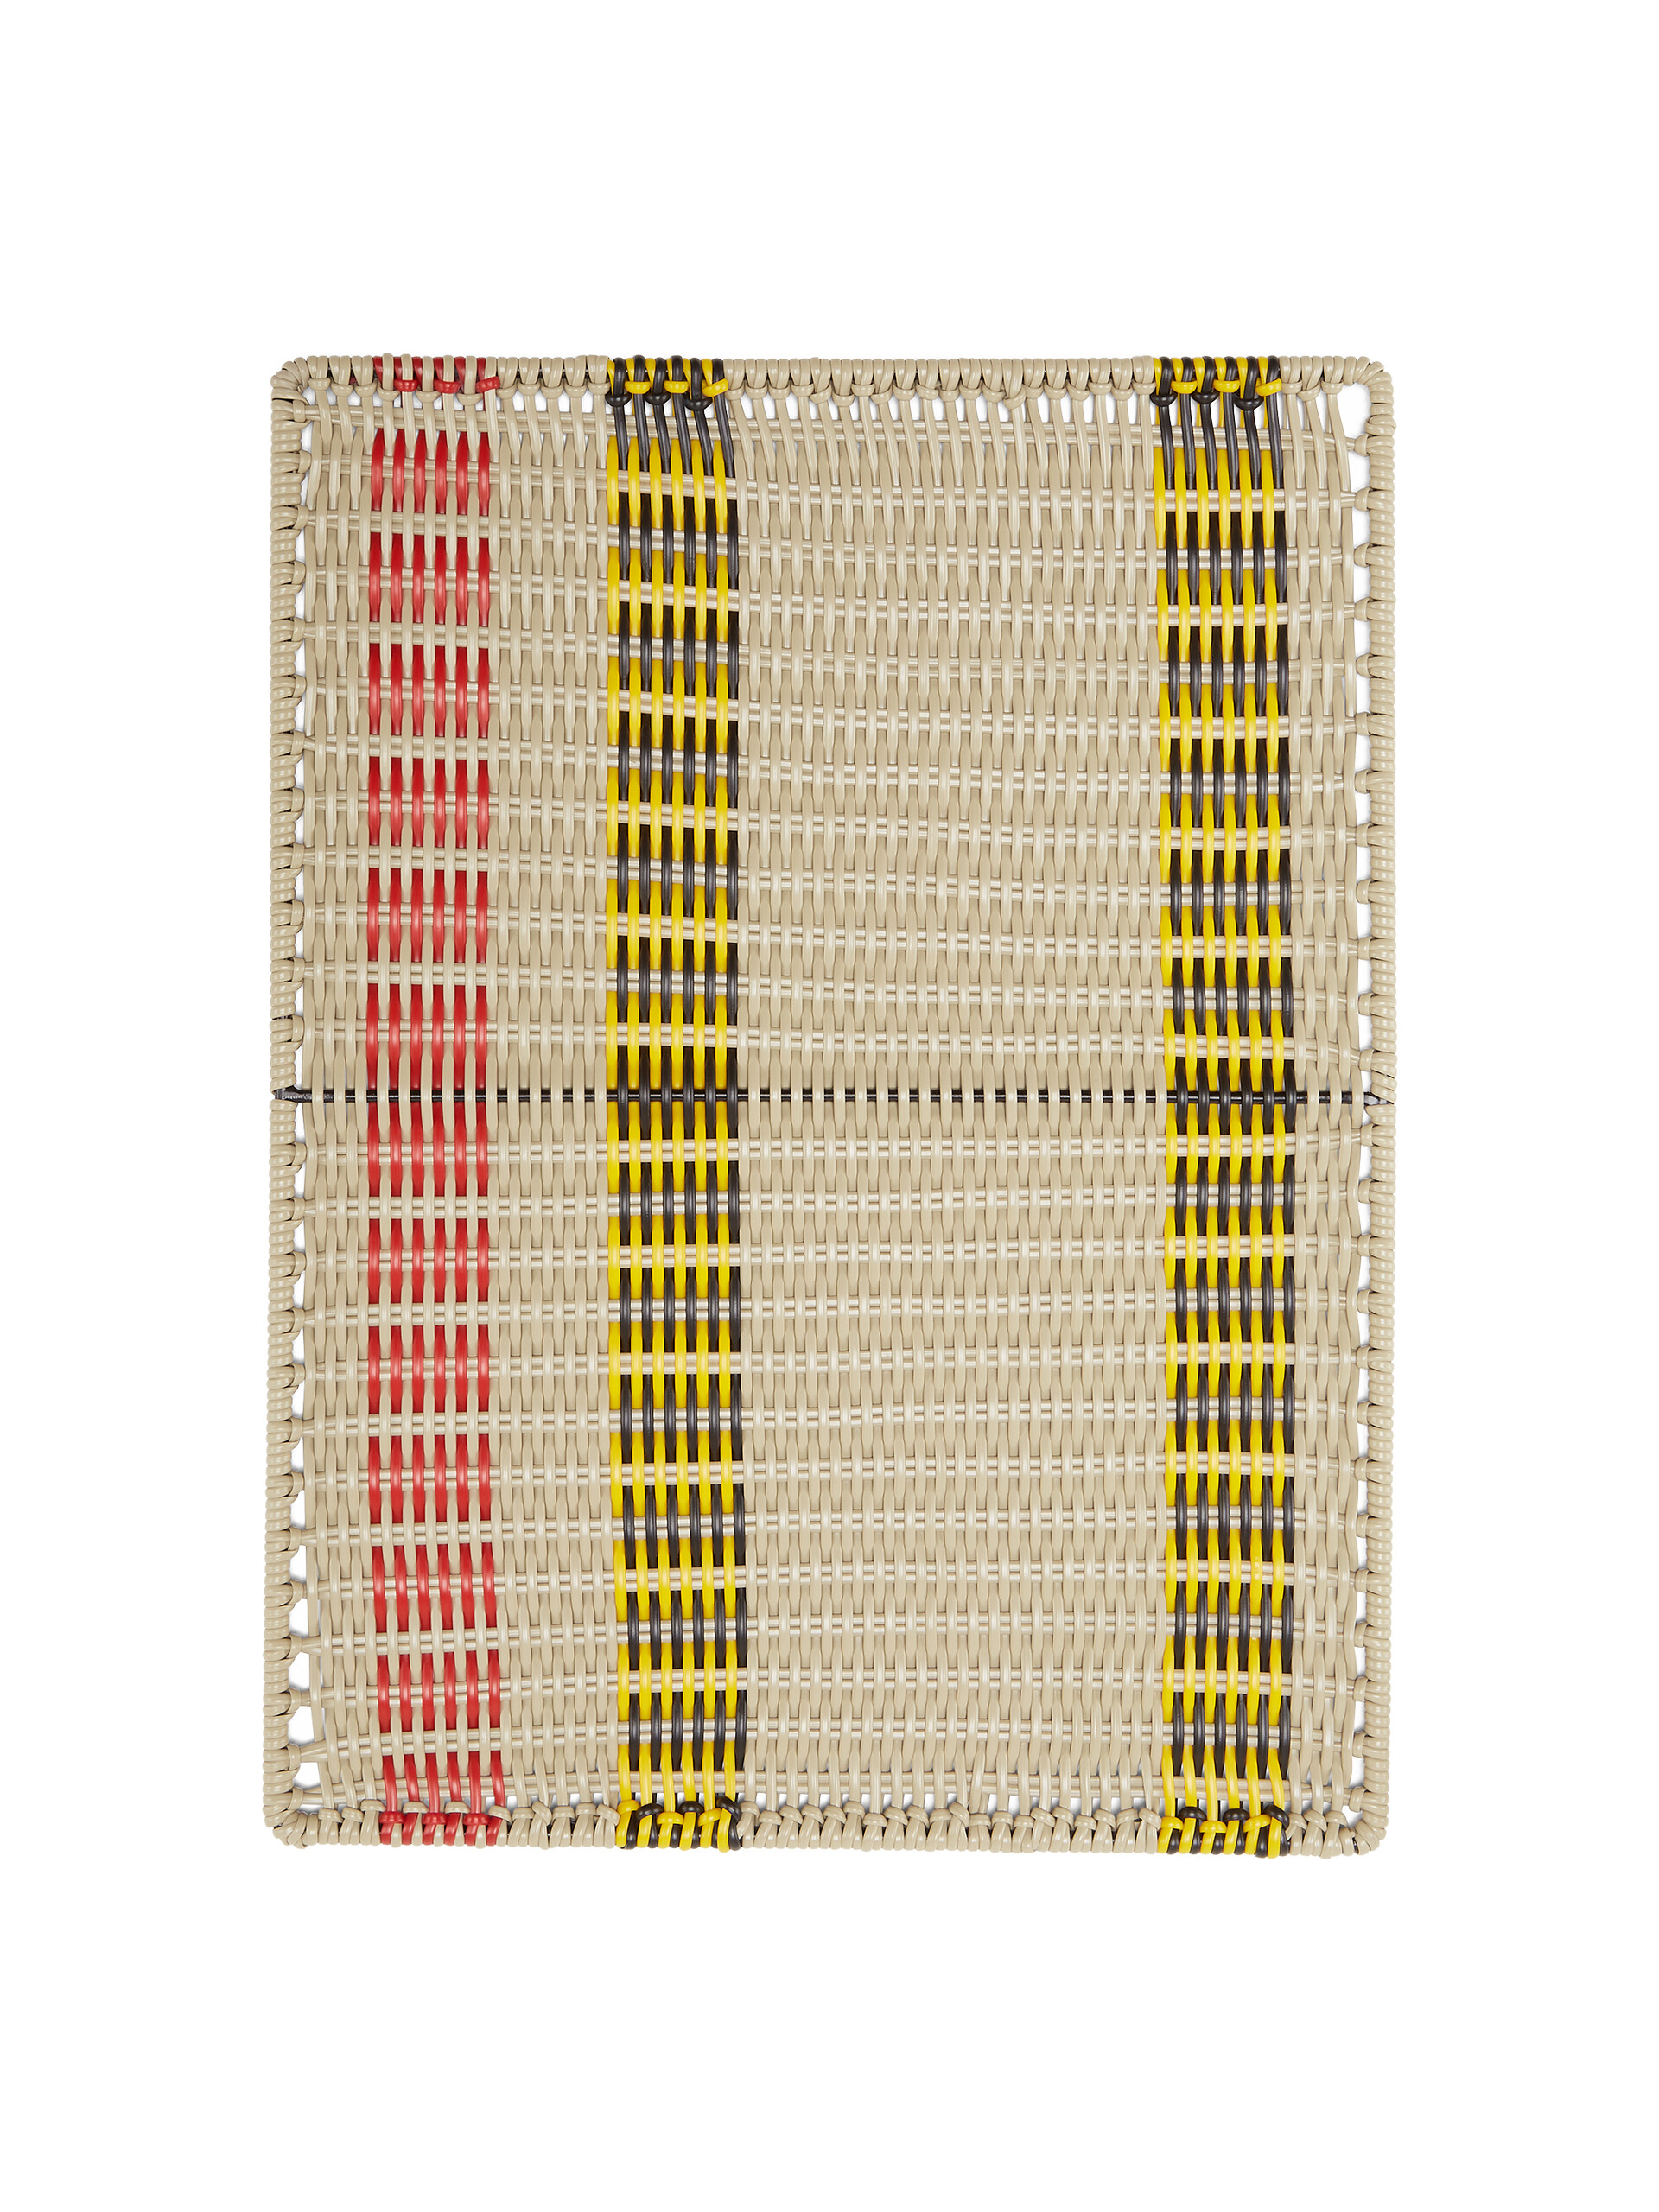 MARNI MARKET rectangular placemat with multicolor striped motif - Accessories - Image 2